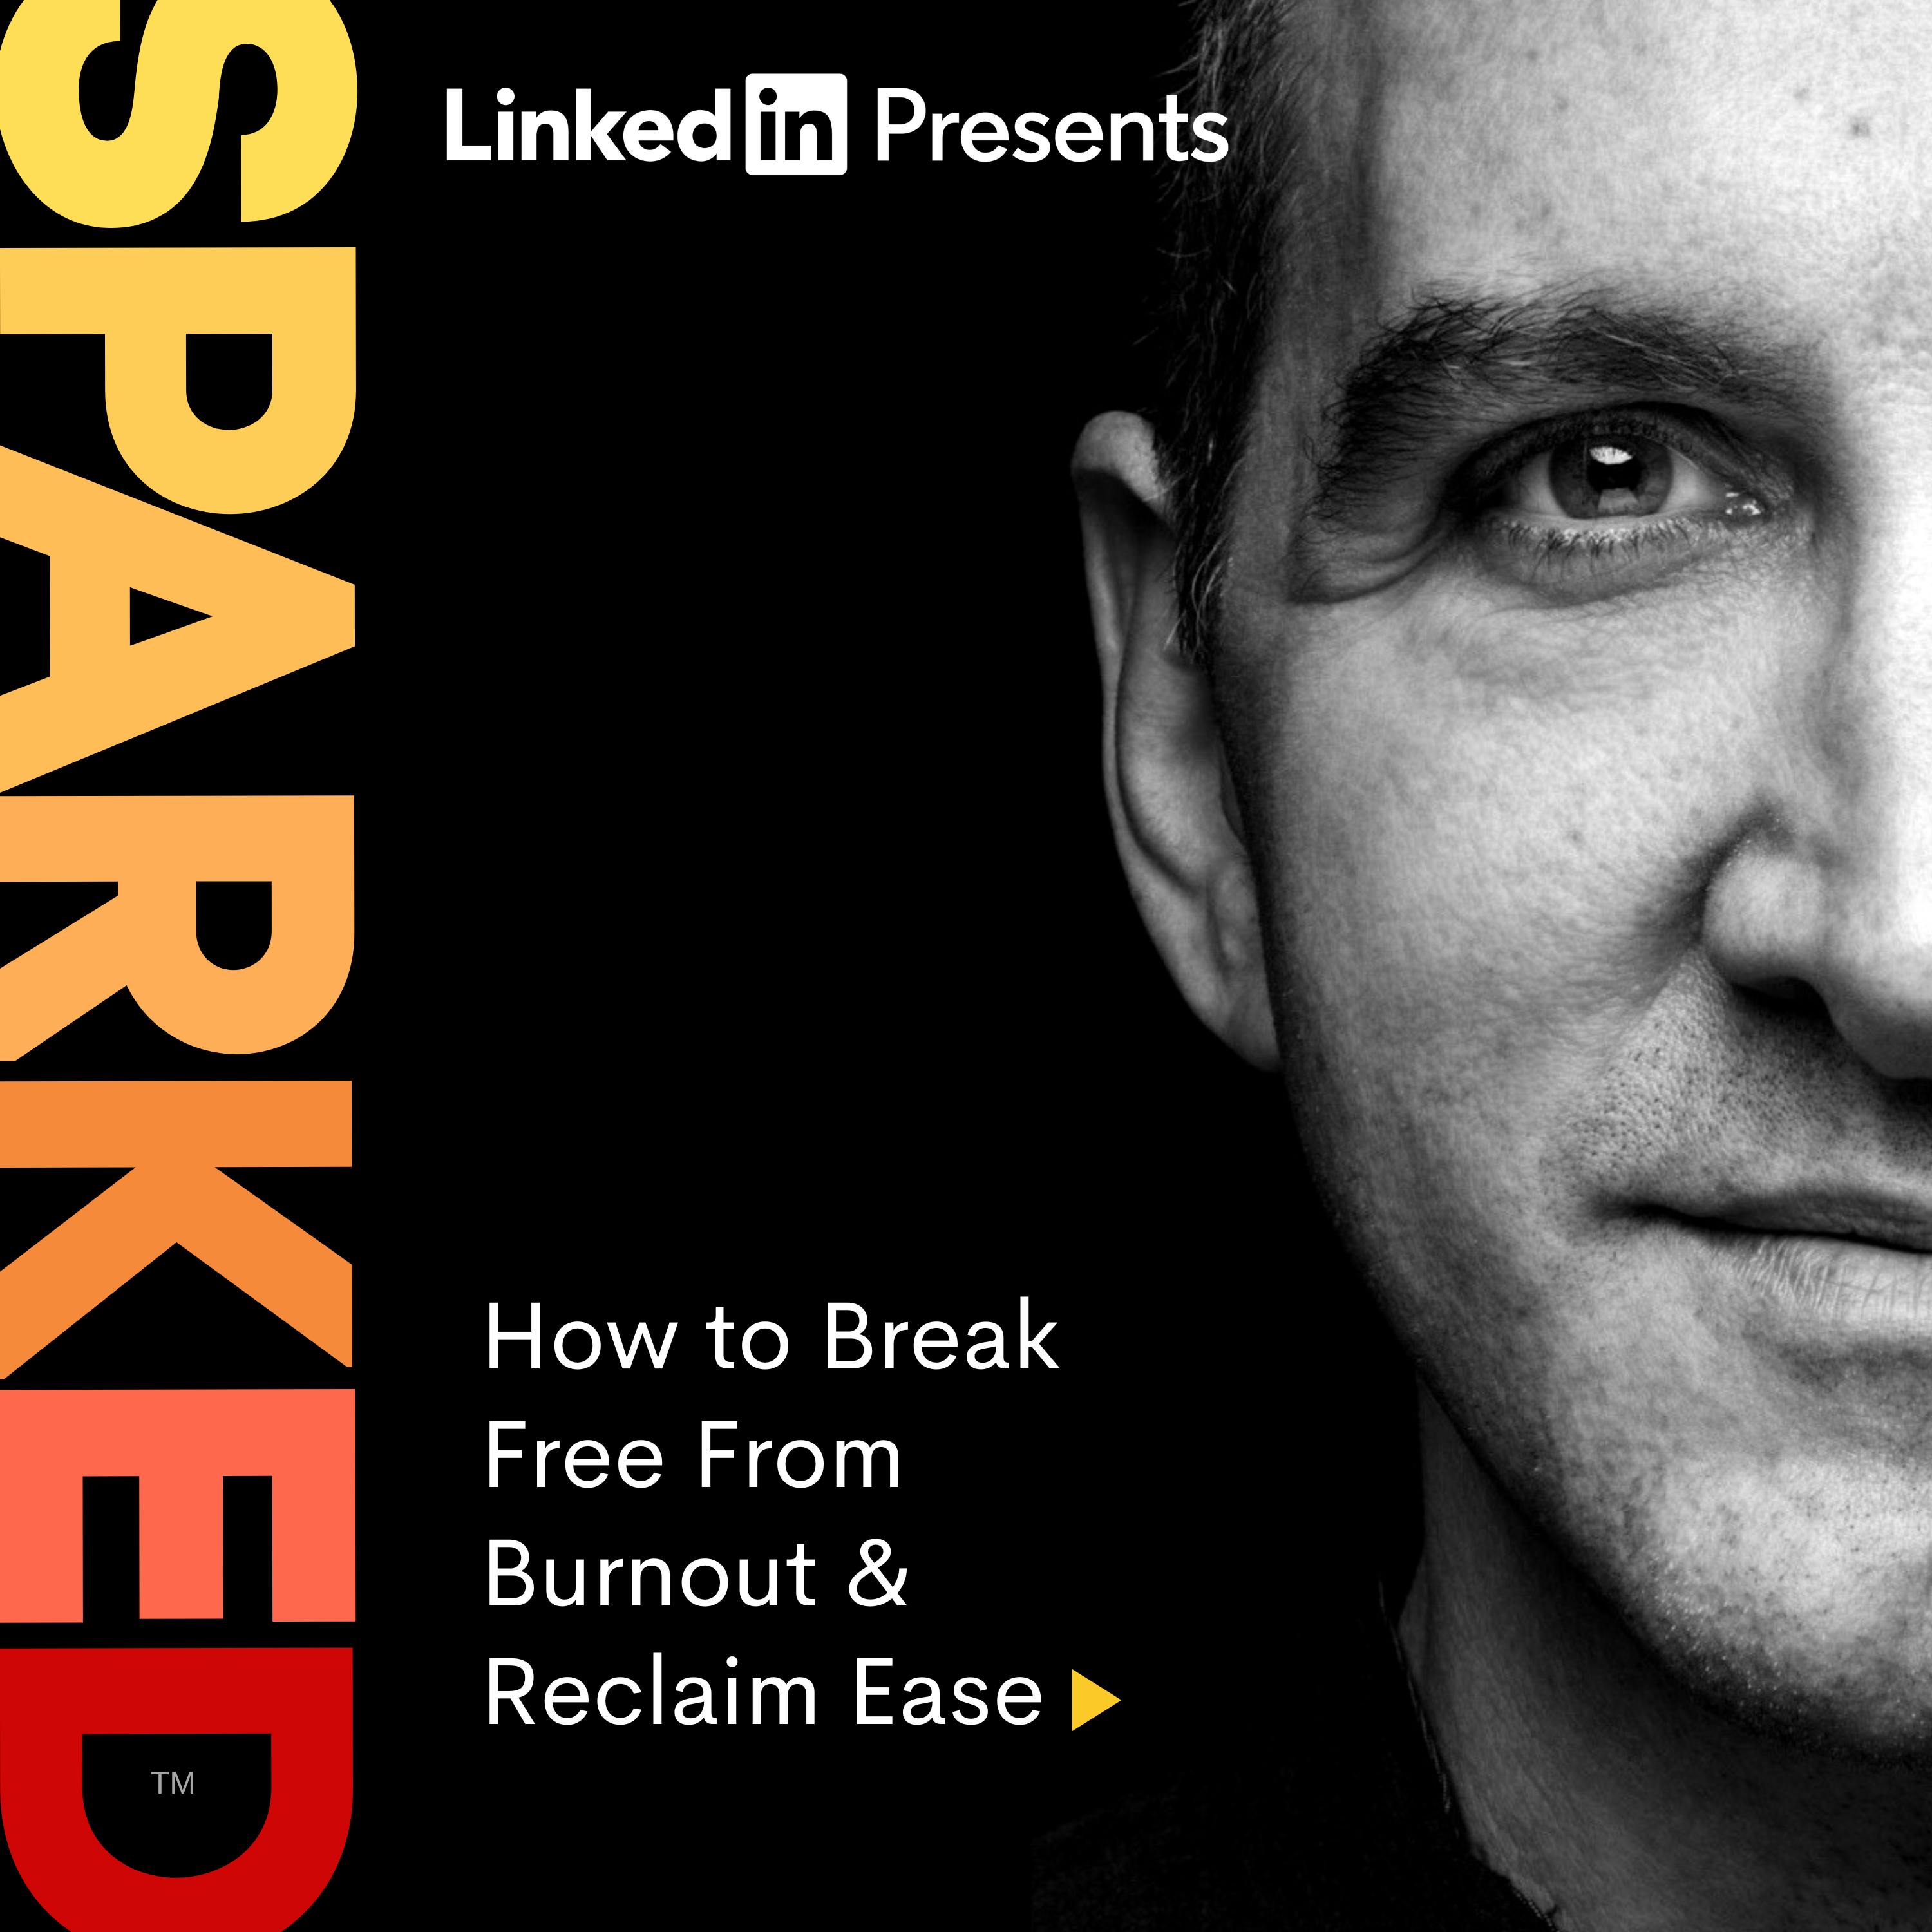 How to Break Free From Burnout & Reclaim Ease